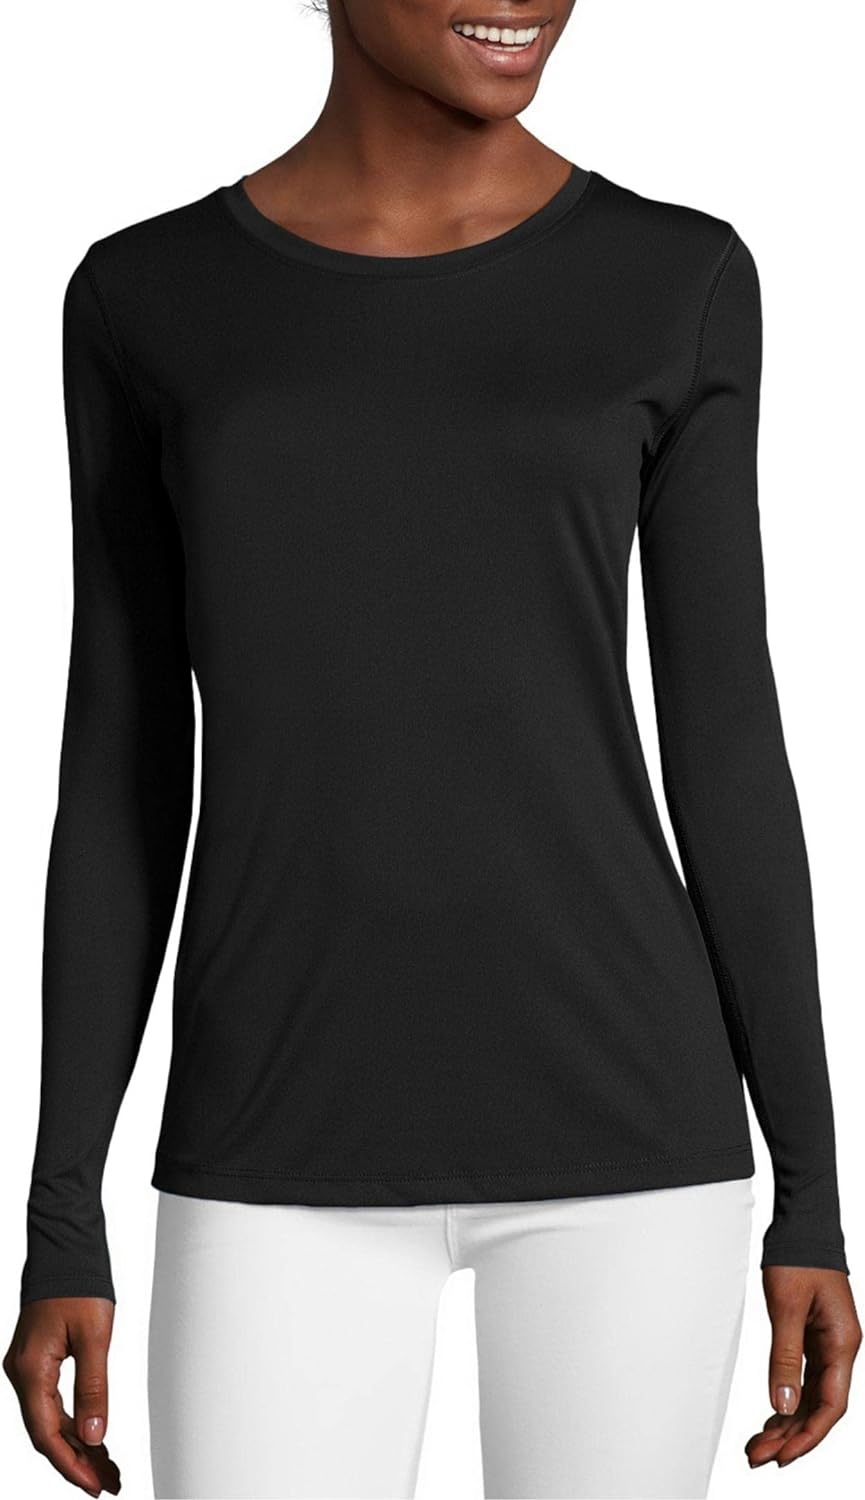 THE GYM PEOPLE Women's Short Sleeve Workout Shirts Breathable Yoga T-Shirts  with Side Slits Athletic